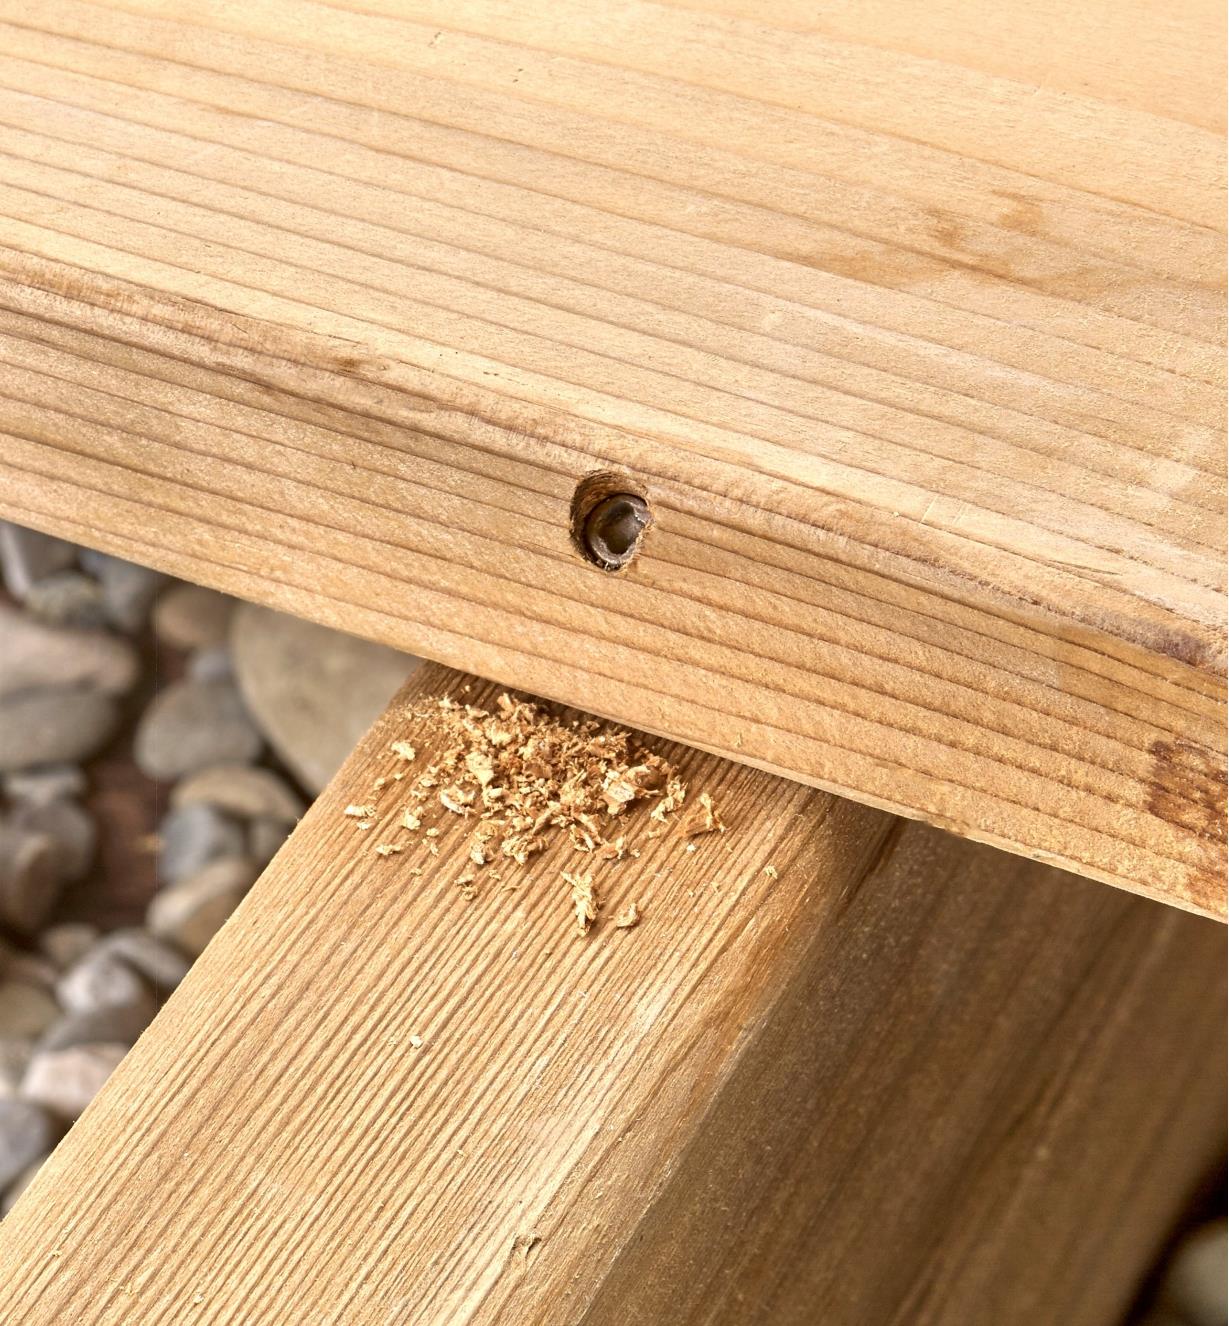 Close up of deck board showing how screw is concealed in the side